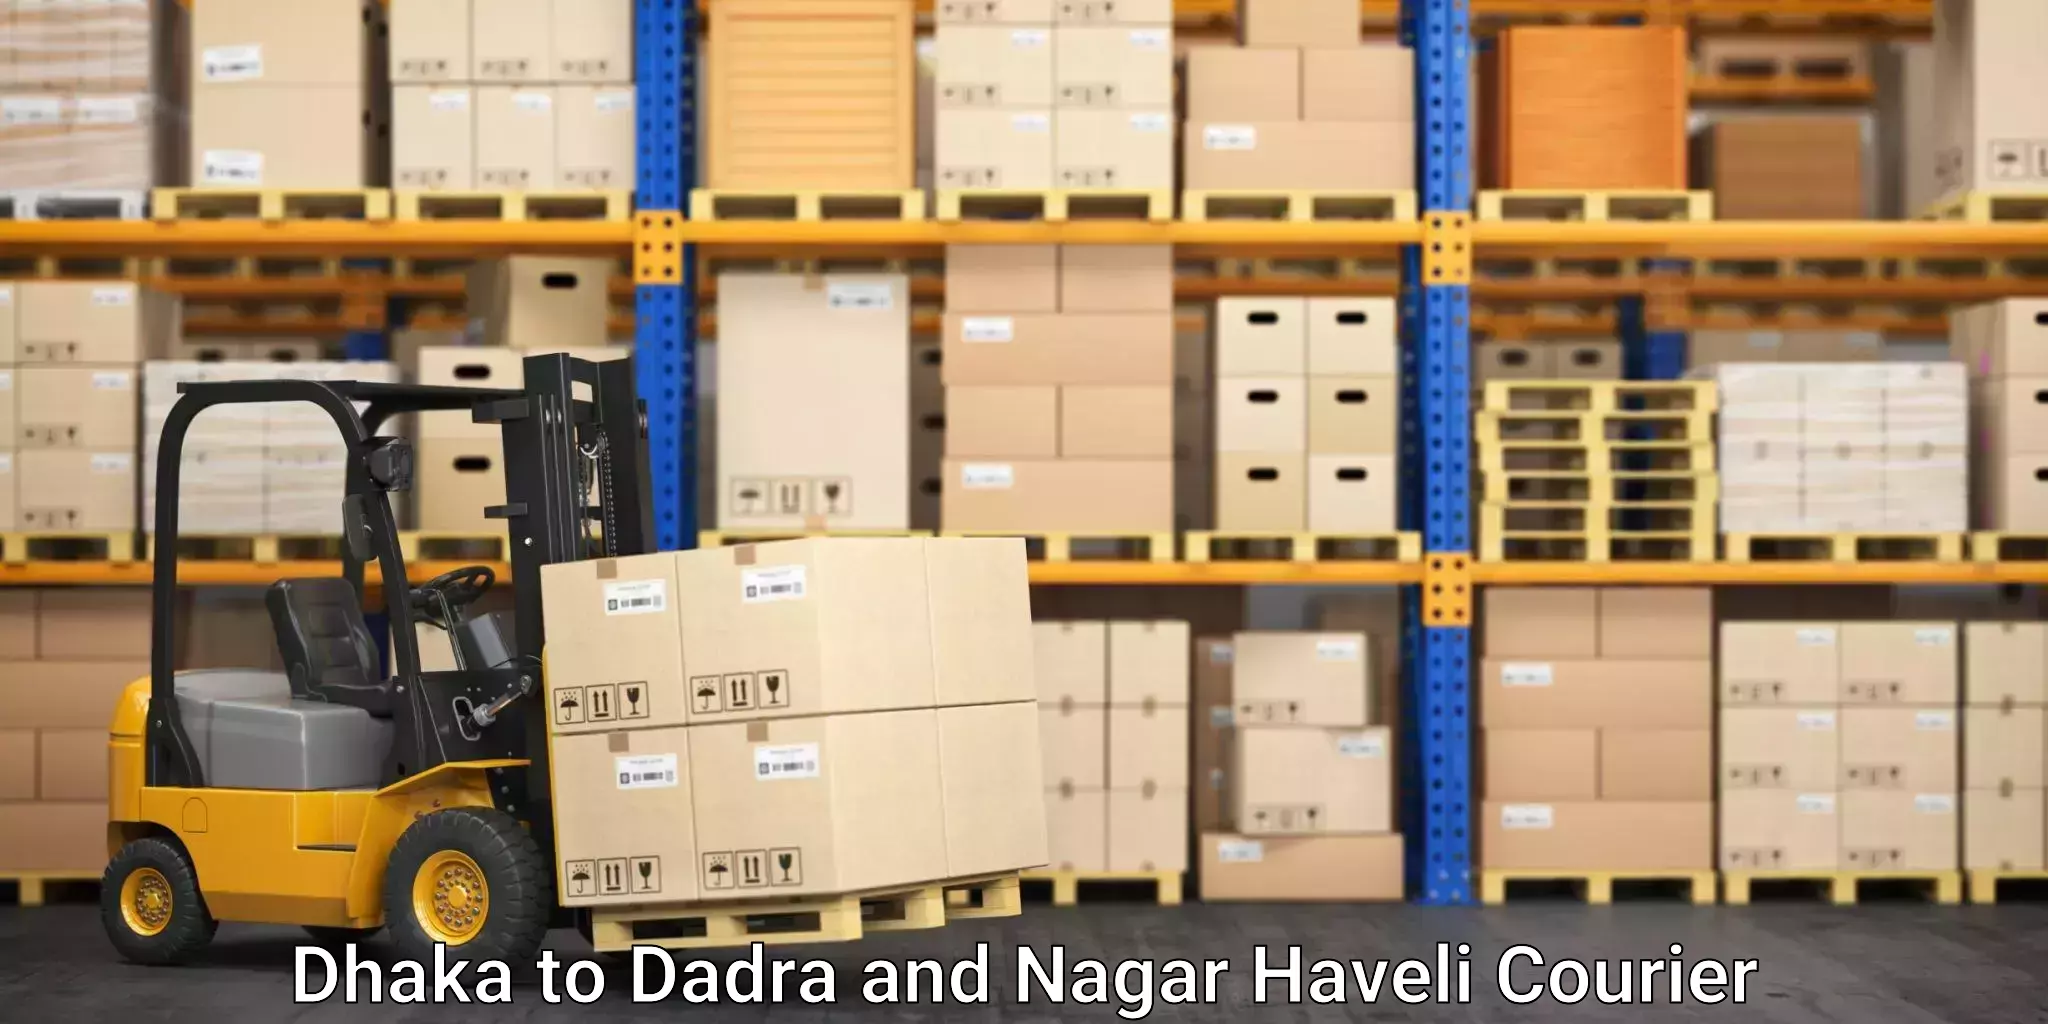 Trusted relocation experts Dhaka to Dadra and Nagar Haveli